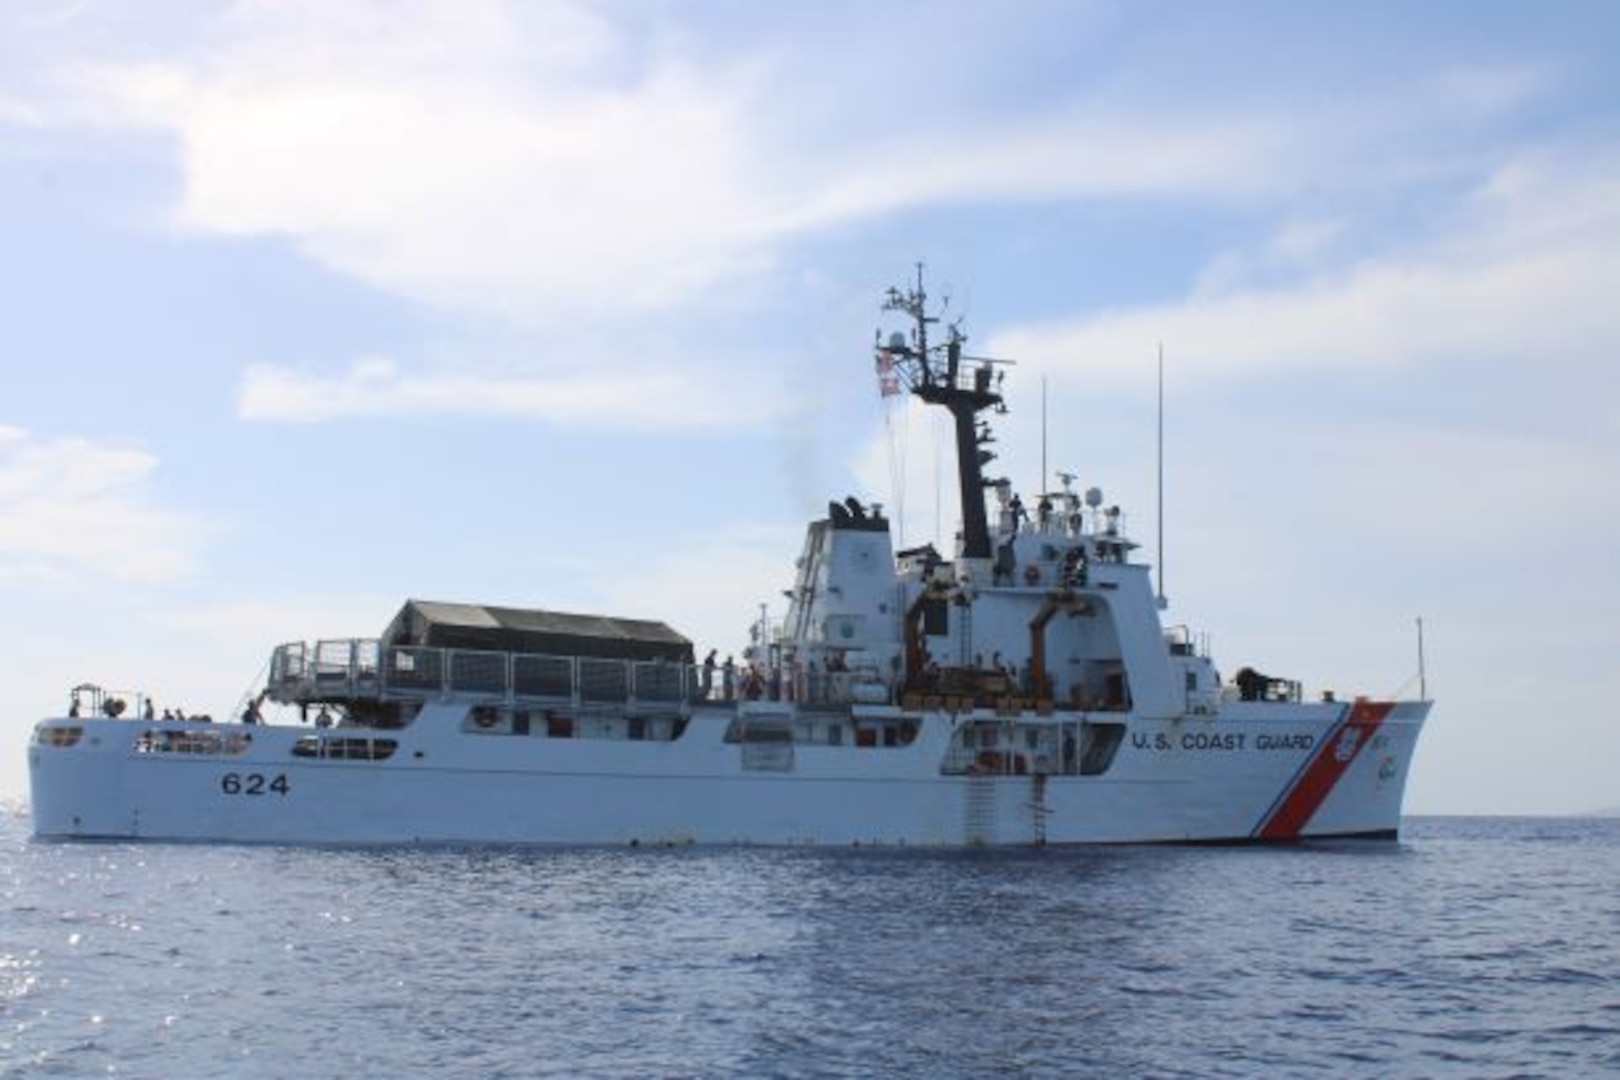 The crew of the U.S. Coast Guard Cutter Dauntless (WMEC 624) patrols the Windward Passage, July 25, 2023. The Dauntless crew returned to their homeport, Aug. 19, 2023, in Pensacola following a 42-day patrol. (U.S. Coast Guard photo by Ensign Olivia Gonzalez)